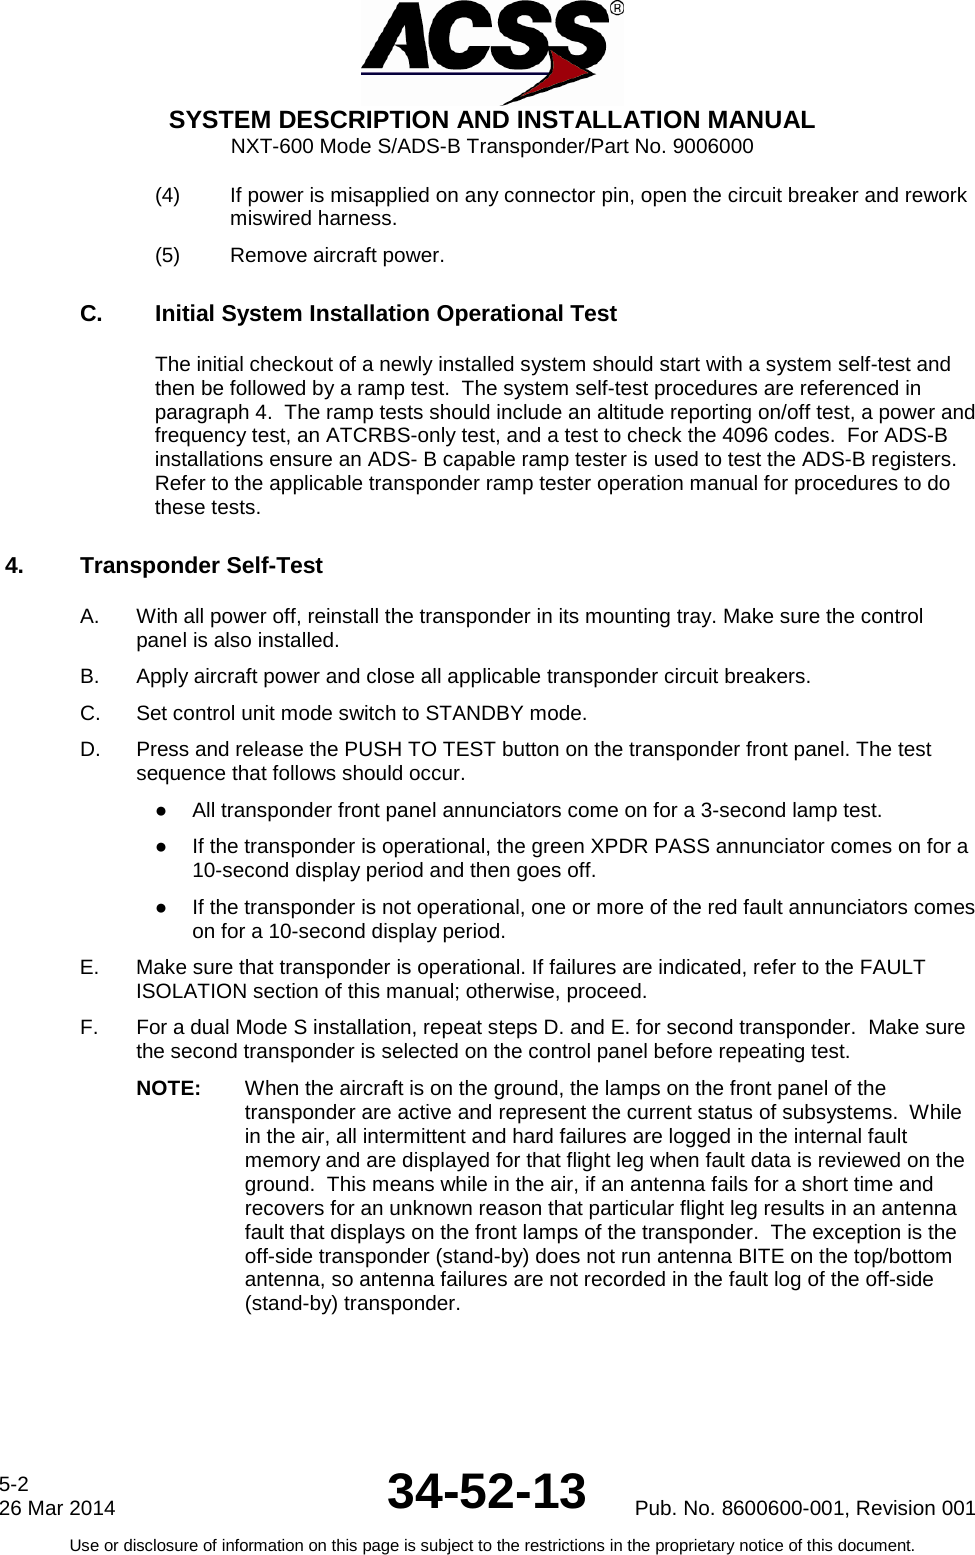  SYSTEM DESCRIPTION AND INSTALLATION MANUAL NXT-600 Mode S/ADS-B Transponder/Part No. 9006000 (4) If power is misapplied on any connector pin, open the circuit breaker and rework miswired harness. (5) Remove aircraft power. C. Initial System Installation Operational Test The initial checkout of a newly installed system should start with a system self-test and then be followed by a ramp test.  The system self-test procedures are referenced in paragraph 4.  The ramp tests should include an altitude reporting on/off test, a power and frequency test, an ATCRBS-only test, and a test to check the 4096 codes.  For ADS-B installations ensure an ADS- B capable ramp tester is used to test the ADS-B registers. Refer to the applicable transponder ramp tester operation manual for procedures to do these tests. 4. Transponder Self-Test A. With all power off, reinstall the transponder in its mounting tray. Make sure the control panel is also installed. B. Apply aircraft power and close all applicable transponder circuit breakers. C. Set control unit mode switch to STANDBY mode. D. Press and release the PUSH TO TEST button on the transponder front panel. The test sequence that follows should occur. ● All transponder front panel annunciators come on for a 3-second lamp test. ● If the transponder is operational, the green XPDR PASS annunciator comes on for a 10-second display period and then goes off. ● If the transponder is not operational, one or more of the red fault annunciators comes on for a 10-second display period. E. Make sure that transponder is operational. If failures are indicated, refer to the FAULT ISOLATION section of this manual; otherwise, proceed. F. For a dual Mode S installation, repeat steps D. and E. for second transponder.  Make sure the second transponder is selected on the control panel before repeating test. NOTE: When the aircraft is on the ground, the lamps on the front panel of the transponder are active and represent the current status of subsystems.  While in the air, all intermittent and hard failures are logged in the internal fault memory and are displayed for that flight leg when fault data is reviewed on the ground.  This means while in the air, if an antenna fails for a short time and recovers for an unknown reason that particular flight leg results in an antenna fault that displays on the front lamps of the transponder.  The exception is the off-side transponder (stand-by) does not run antenna BITE on the top/bottom antenna, so antenna failures are not recorded in the fault log of the off-side (stand-by) transponder. 5-2 26 Mar 2014 34-52-13 Pub. No. 8600600-001, Revision 001 Use or disclosure of information on this page is subject to the restrictions in the proprietary notice of this document.  